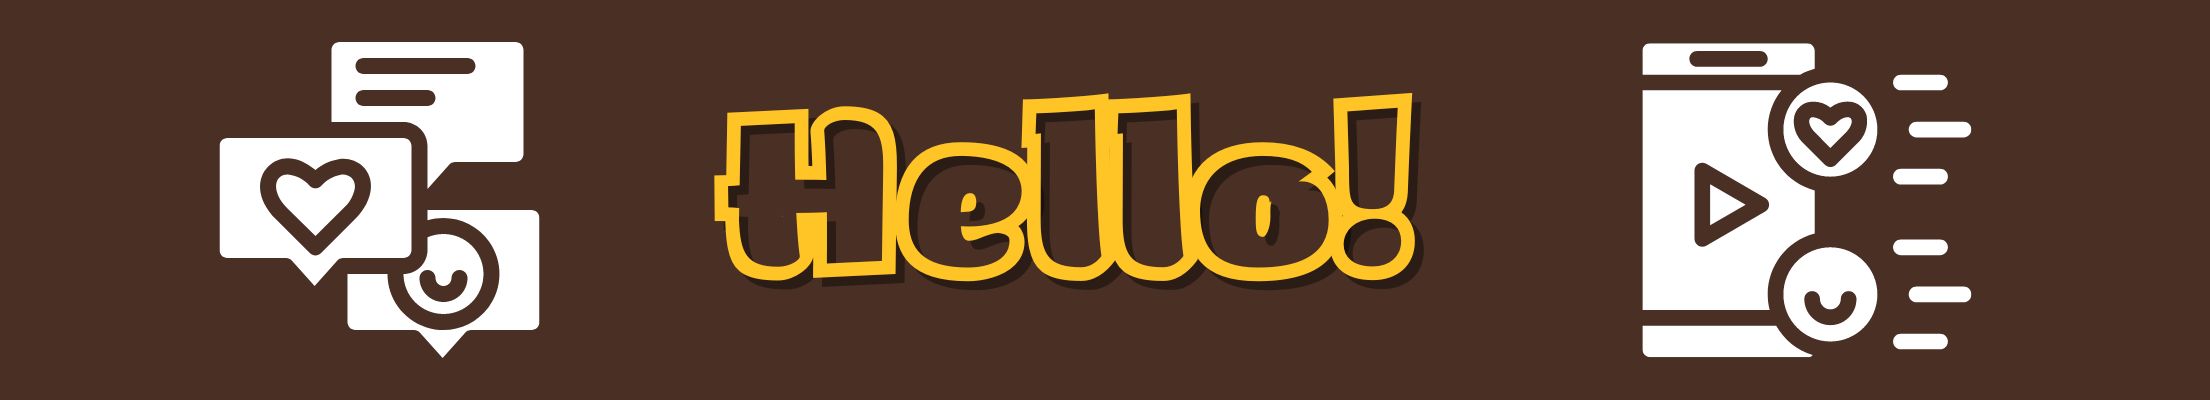 A brown background with two phone icons and the word "Hello" in the middle